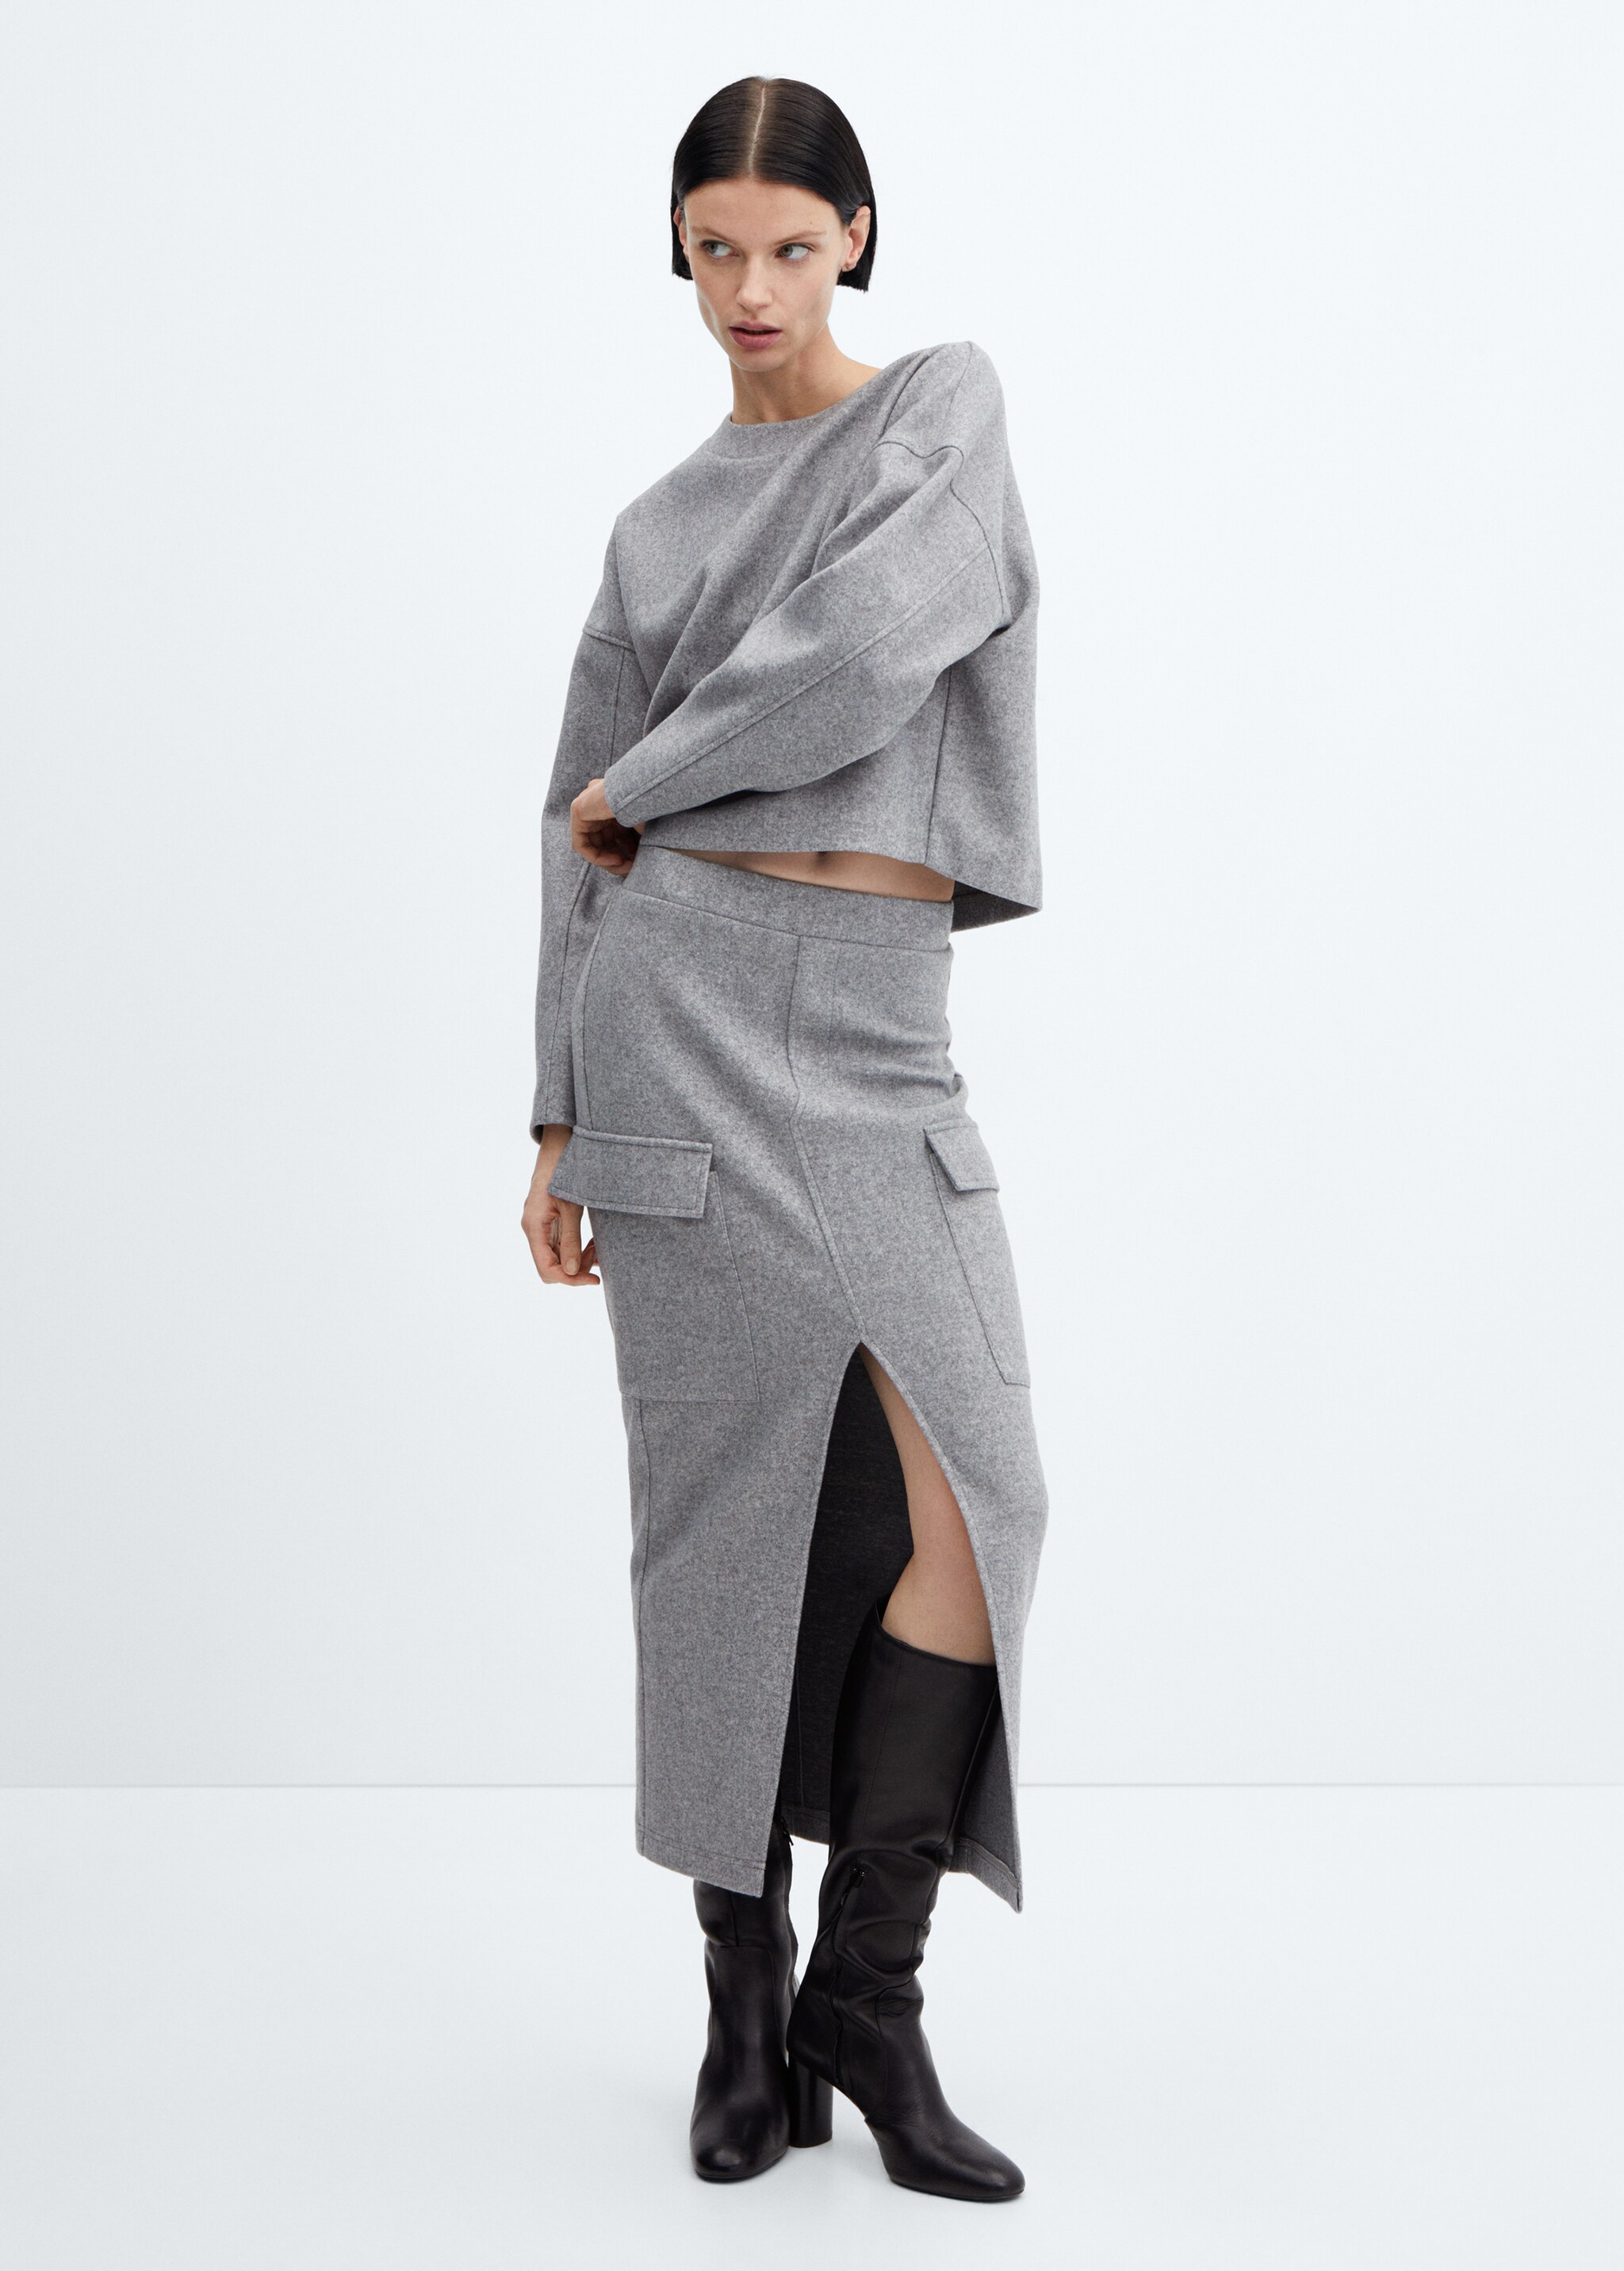 Cargo skirt with slit - General plane